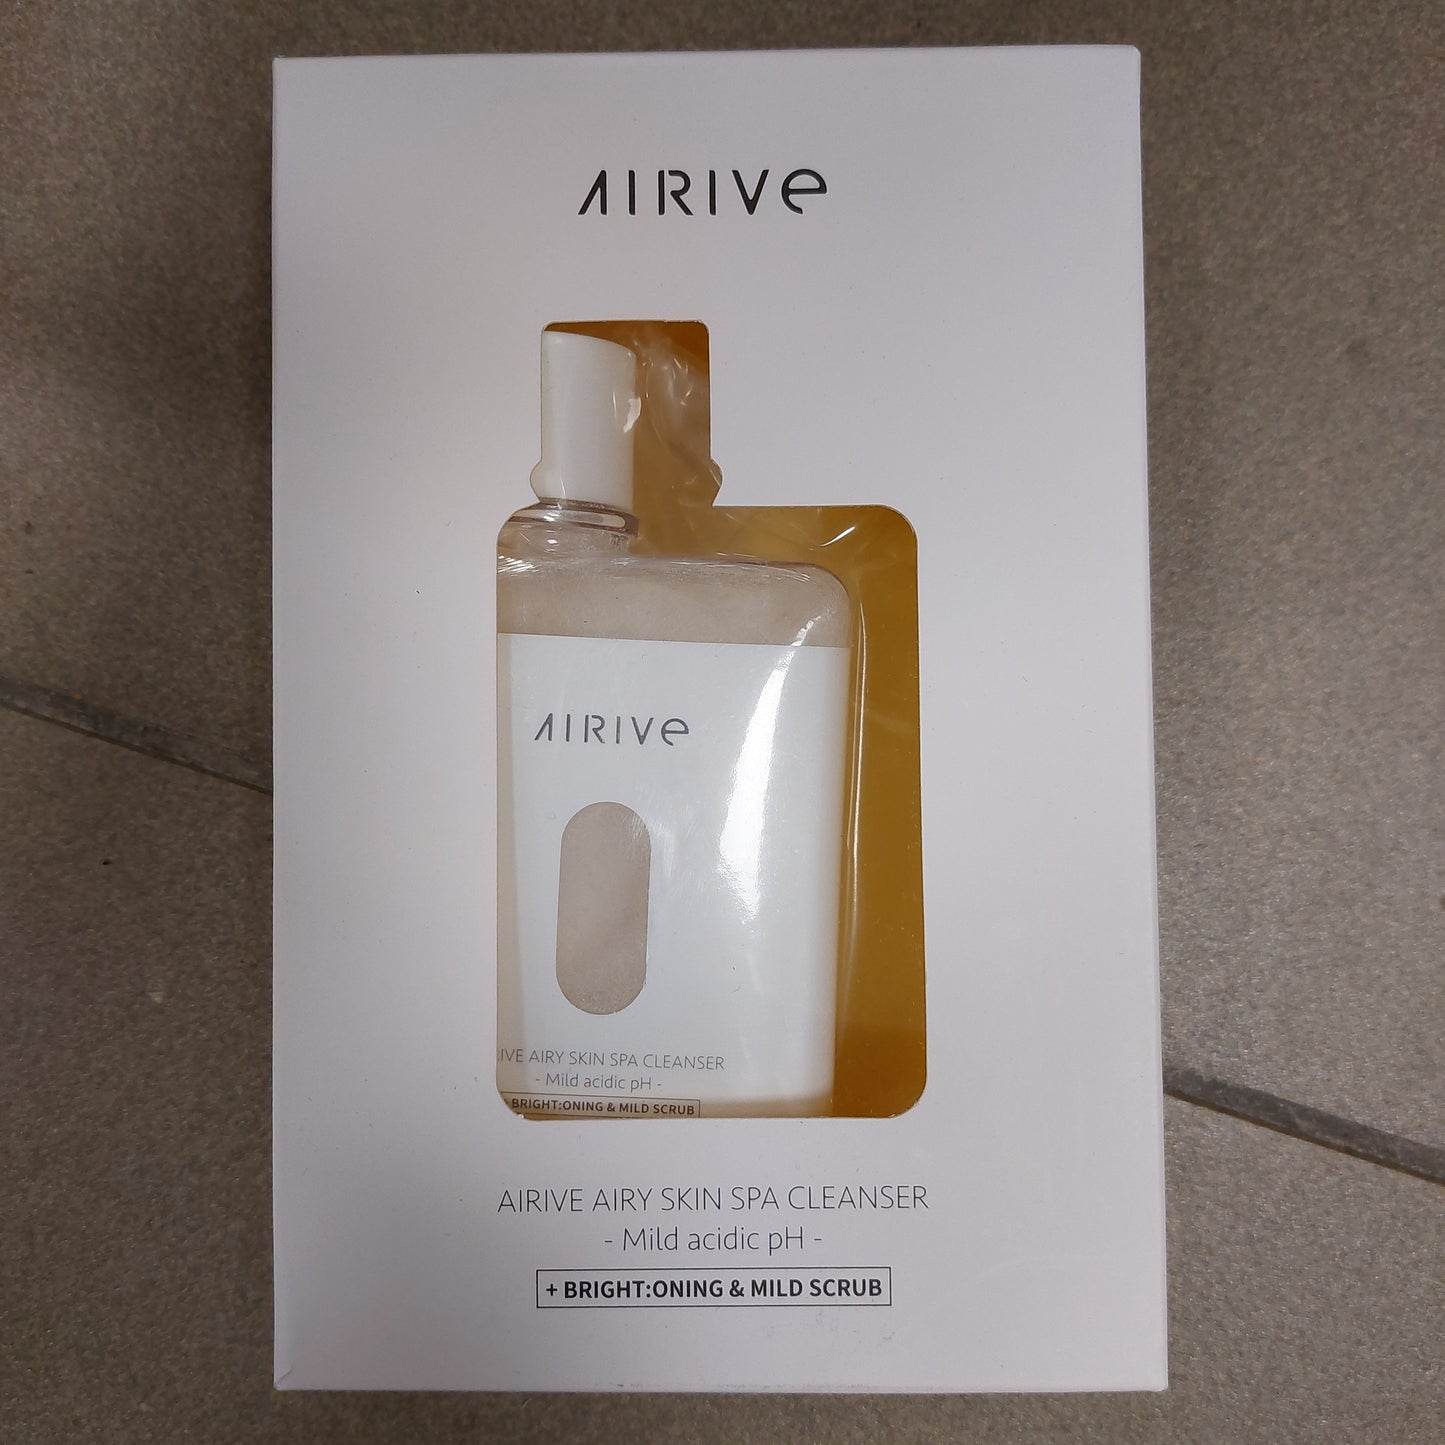 AIRIVE Airy Skin Spa Cleanser (Bright Oning and Mild Scrub)